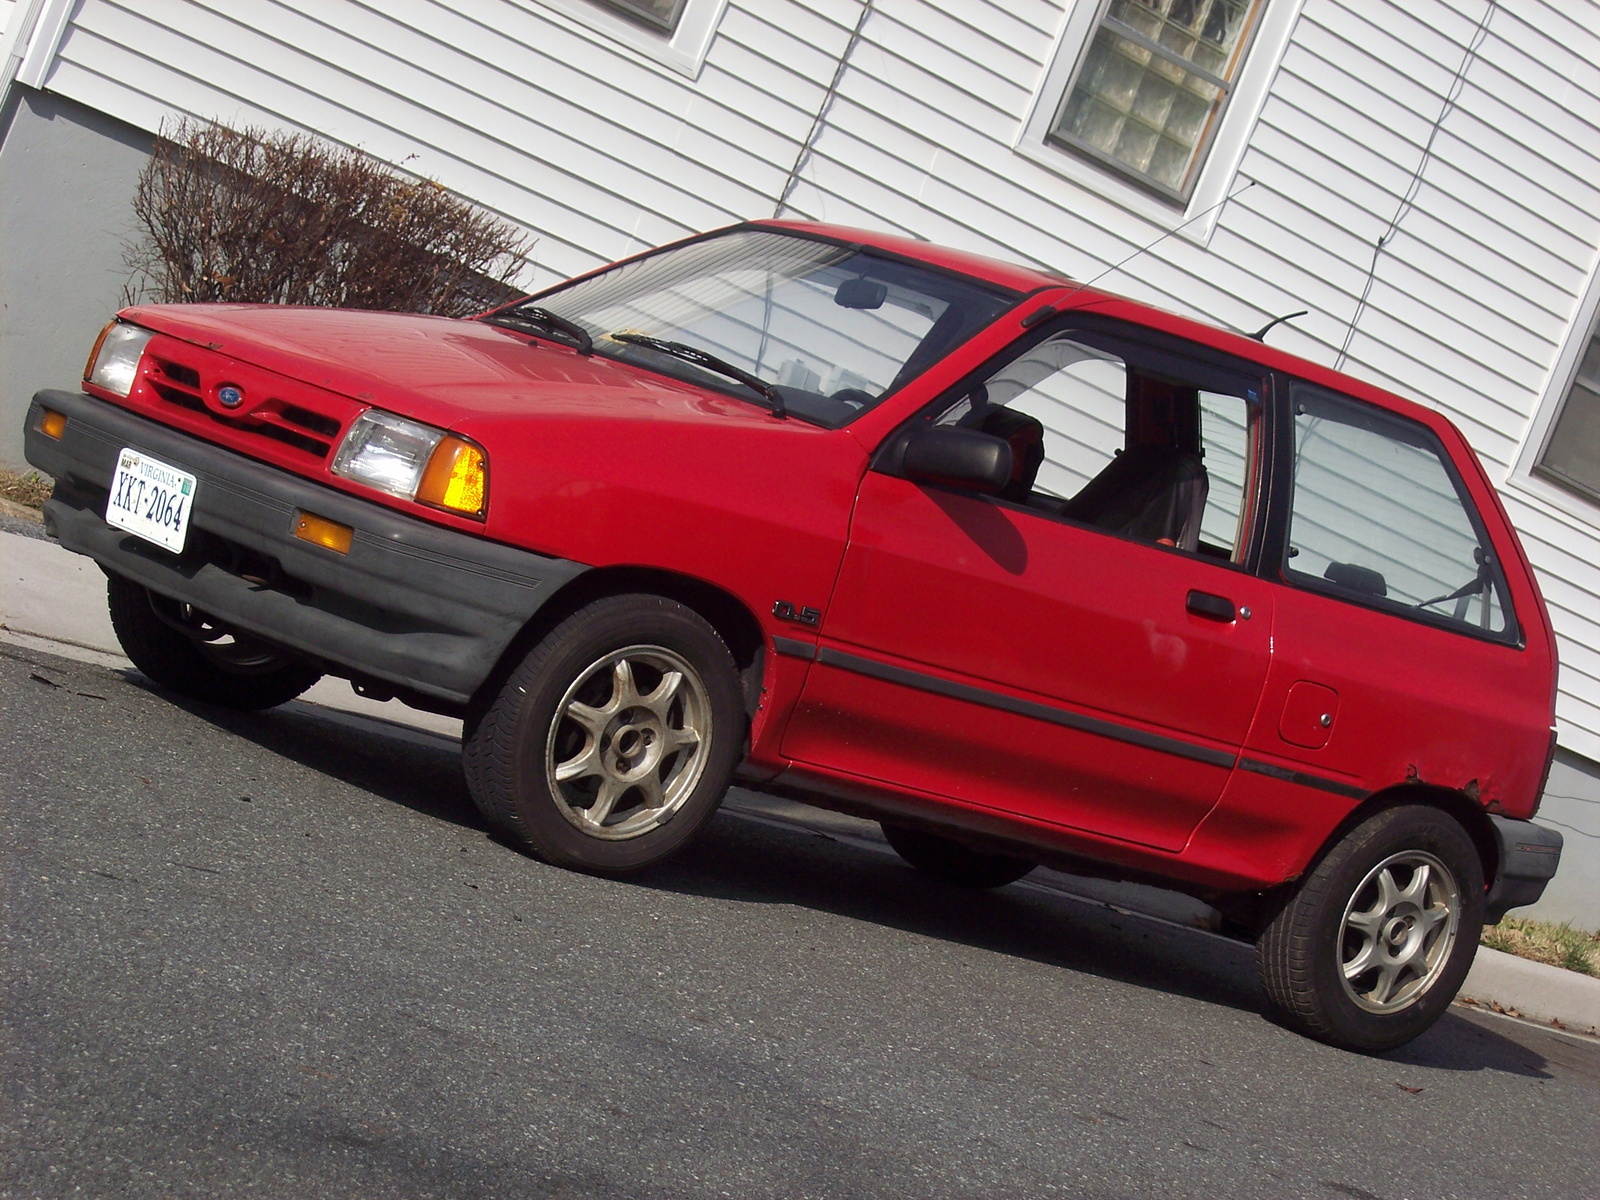 Ford Festiva 1988: Review, Amazing Pictures and Images – Look at the car